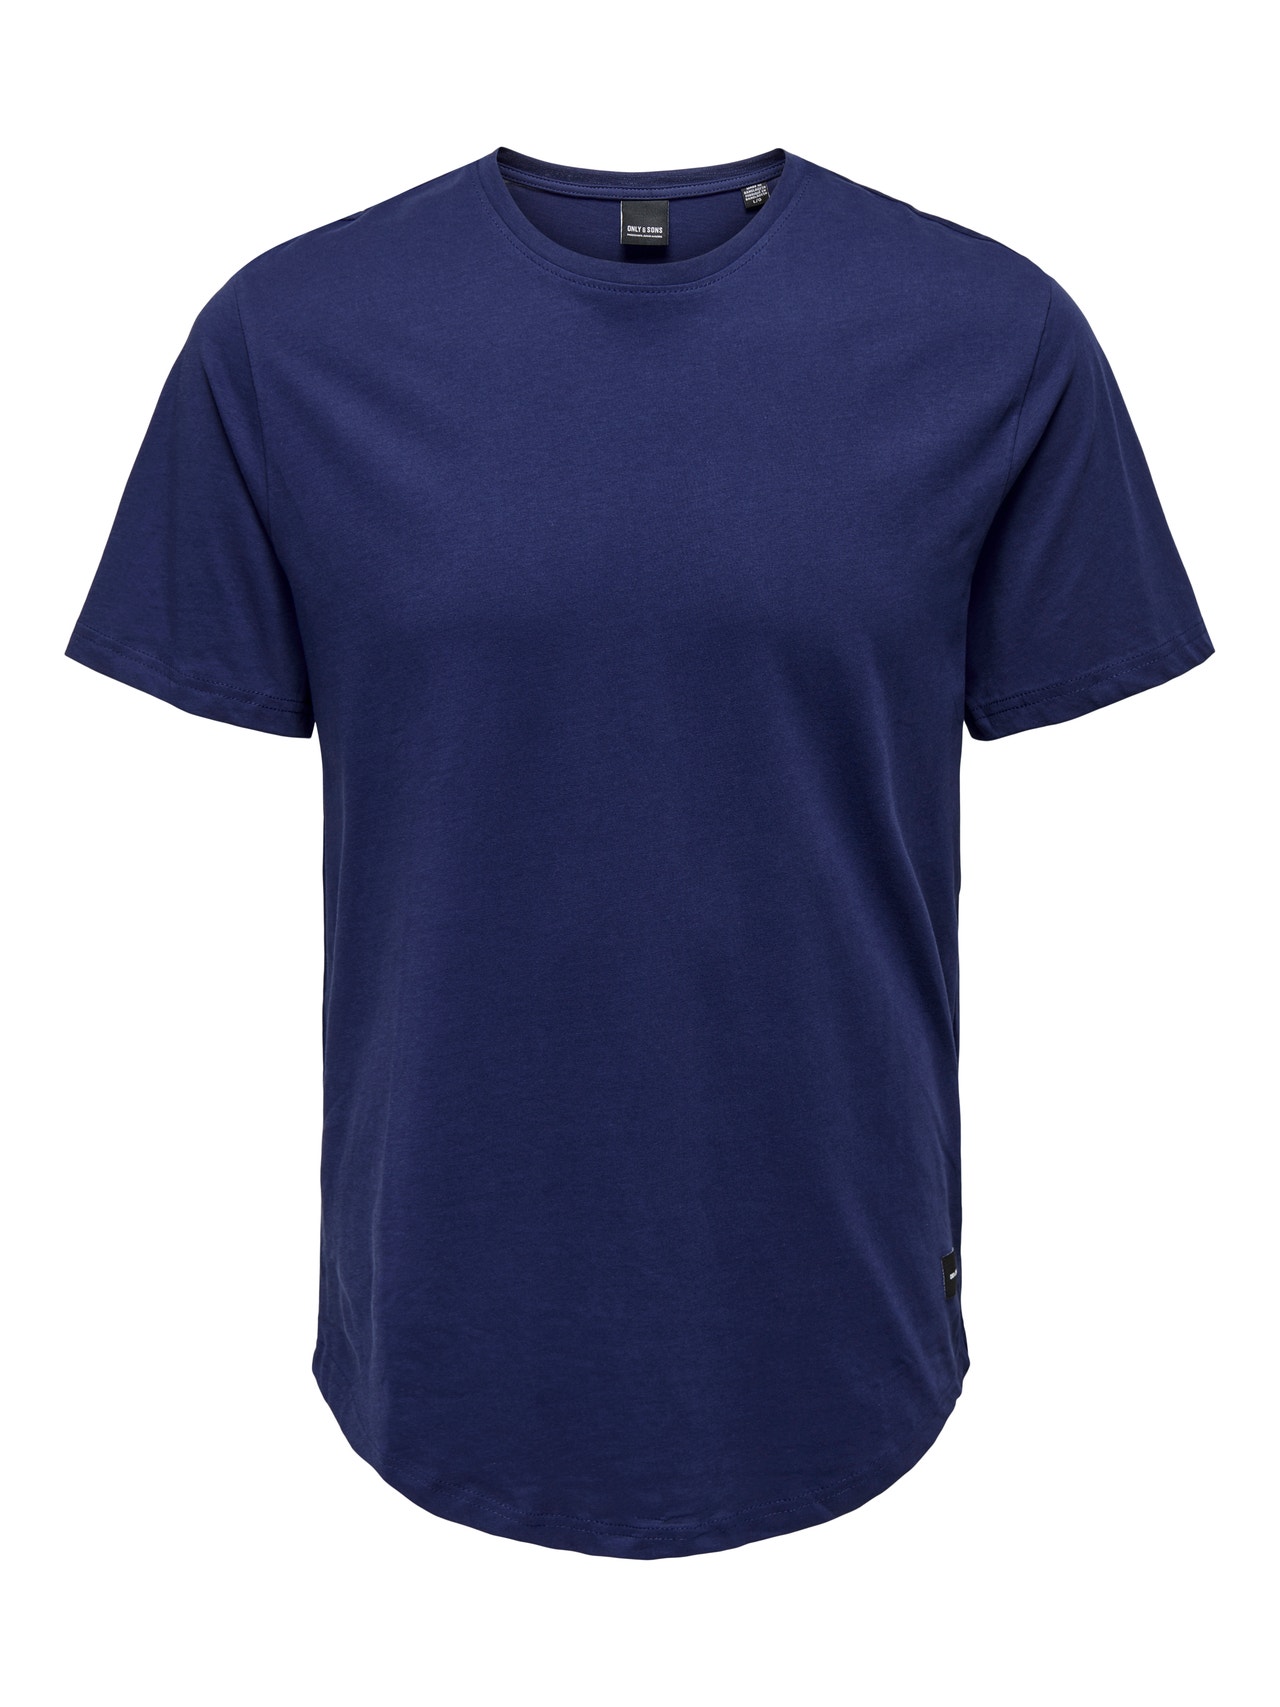 ONLY & SONS Long Line Fit Round Neck T-Shirt -Beacon Blue - 22002973